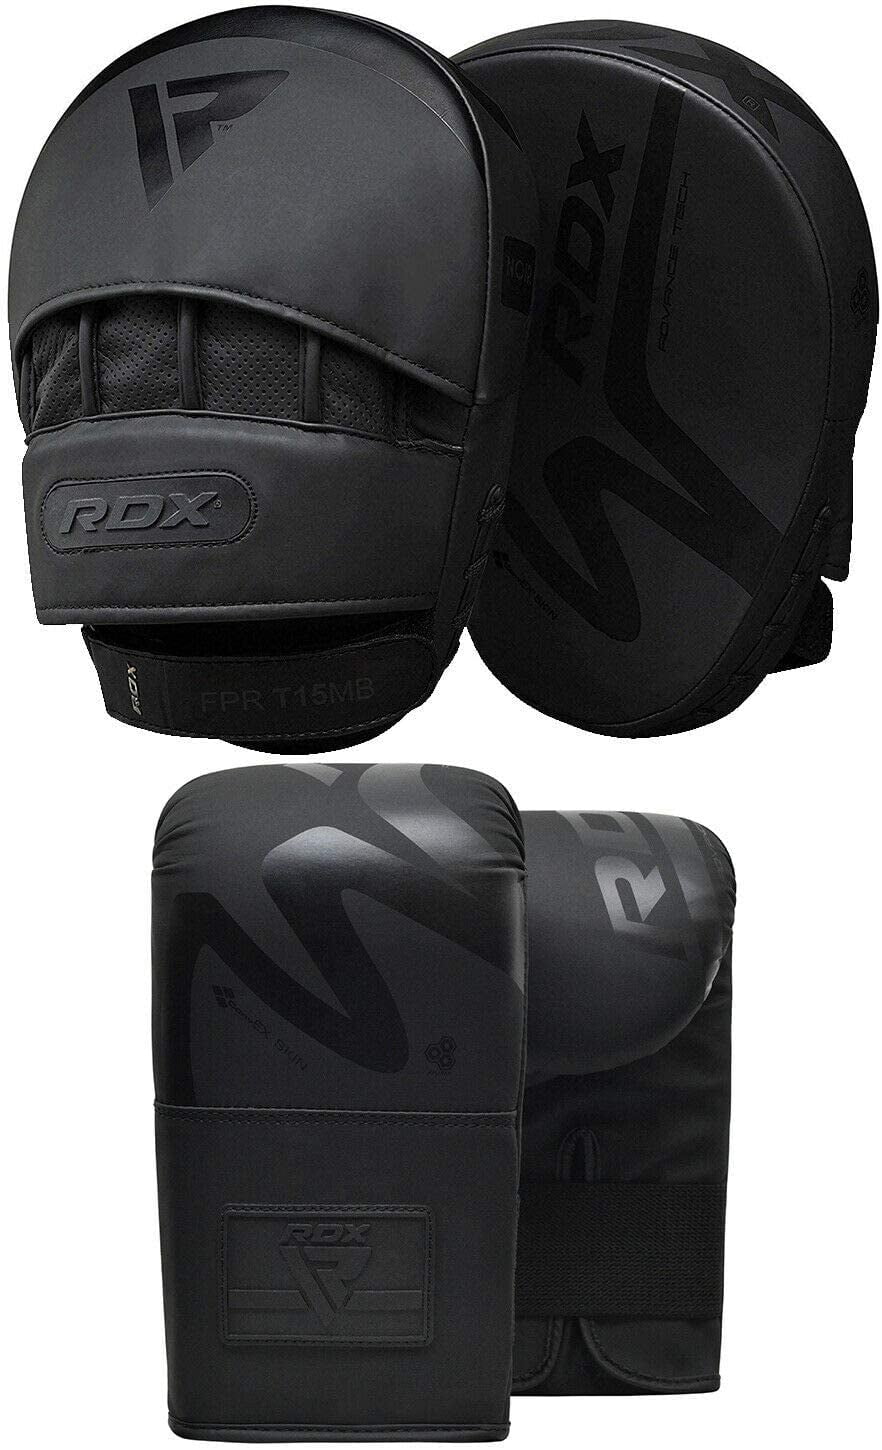 Punching Hand Target Strike Shield Curved Focus Mitts for MMA RDX Boxing Pads and Bag Gloves Set Martial Arts Kickboxing Coaching Muay Thai Maya Hide Leather Kara Hook and Jab Training Pads 